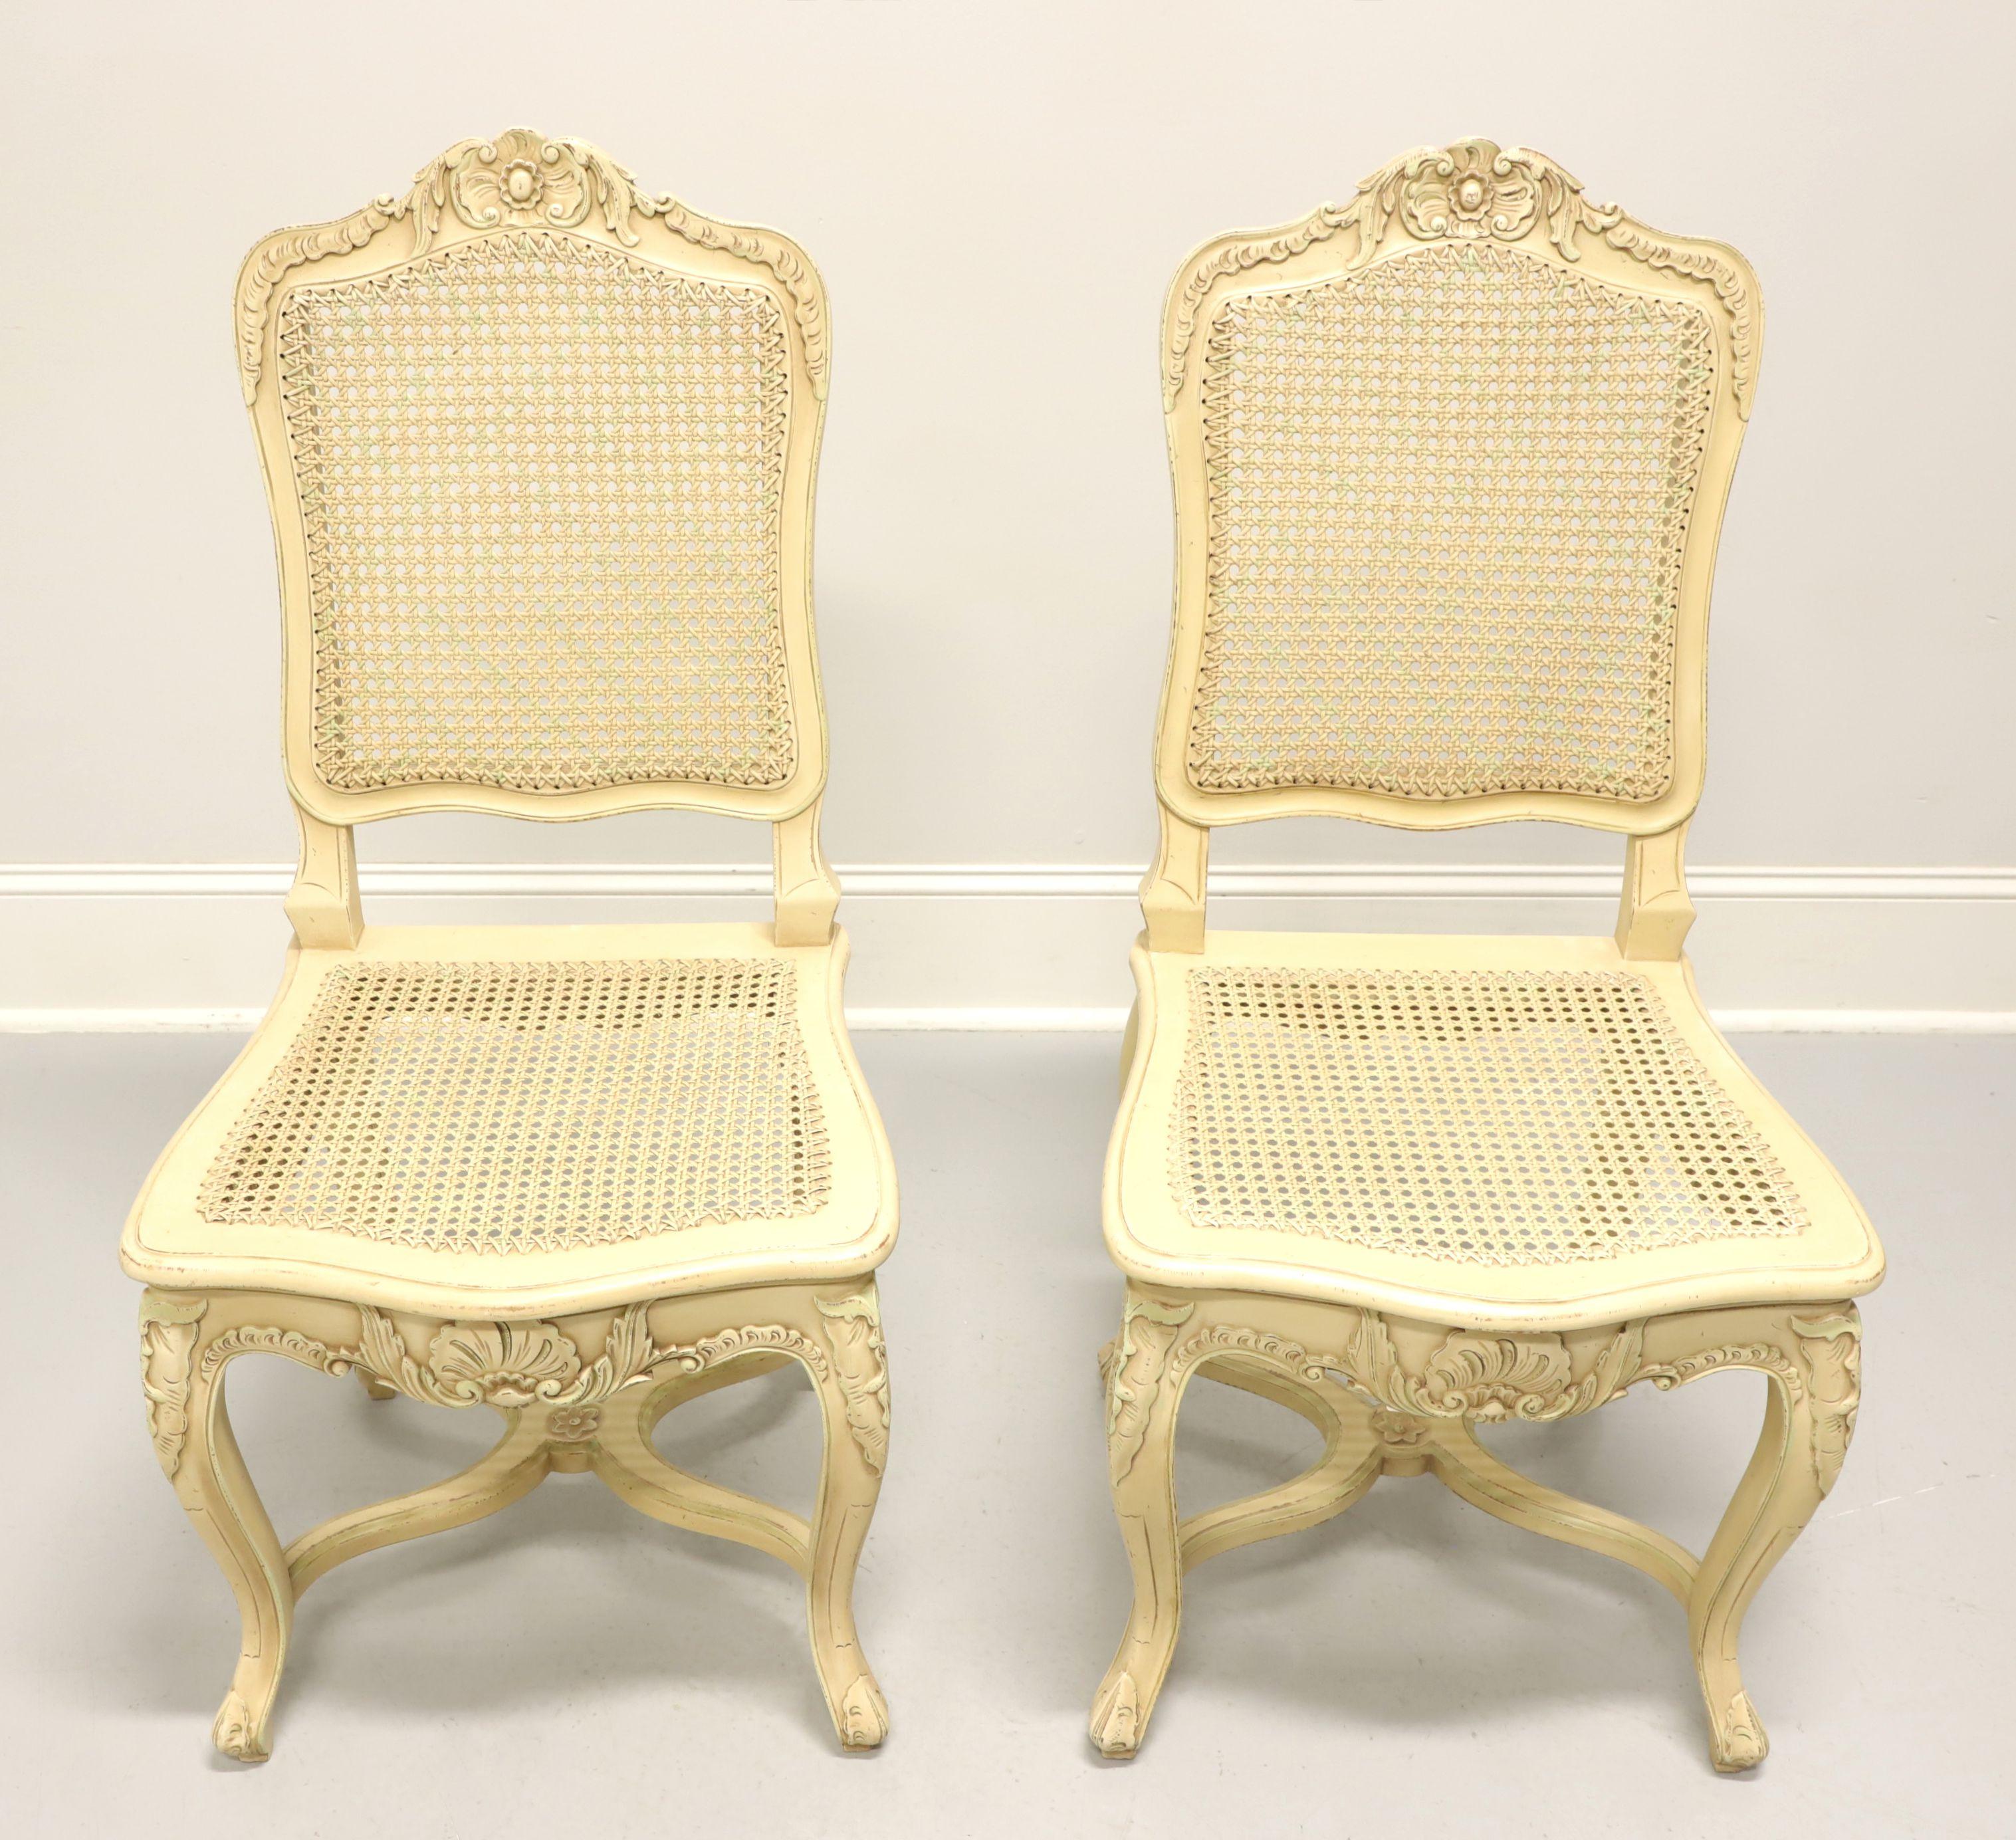 A pair of French Provincial style dining side chairs, unbranded, similar quality to Drexel. Solid wood painted an antique white with a slight distressing, decoratively carved crest rail, cane back & seat, carved apron & knees, curved legs and